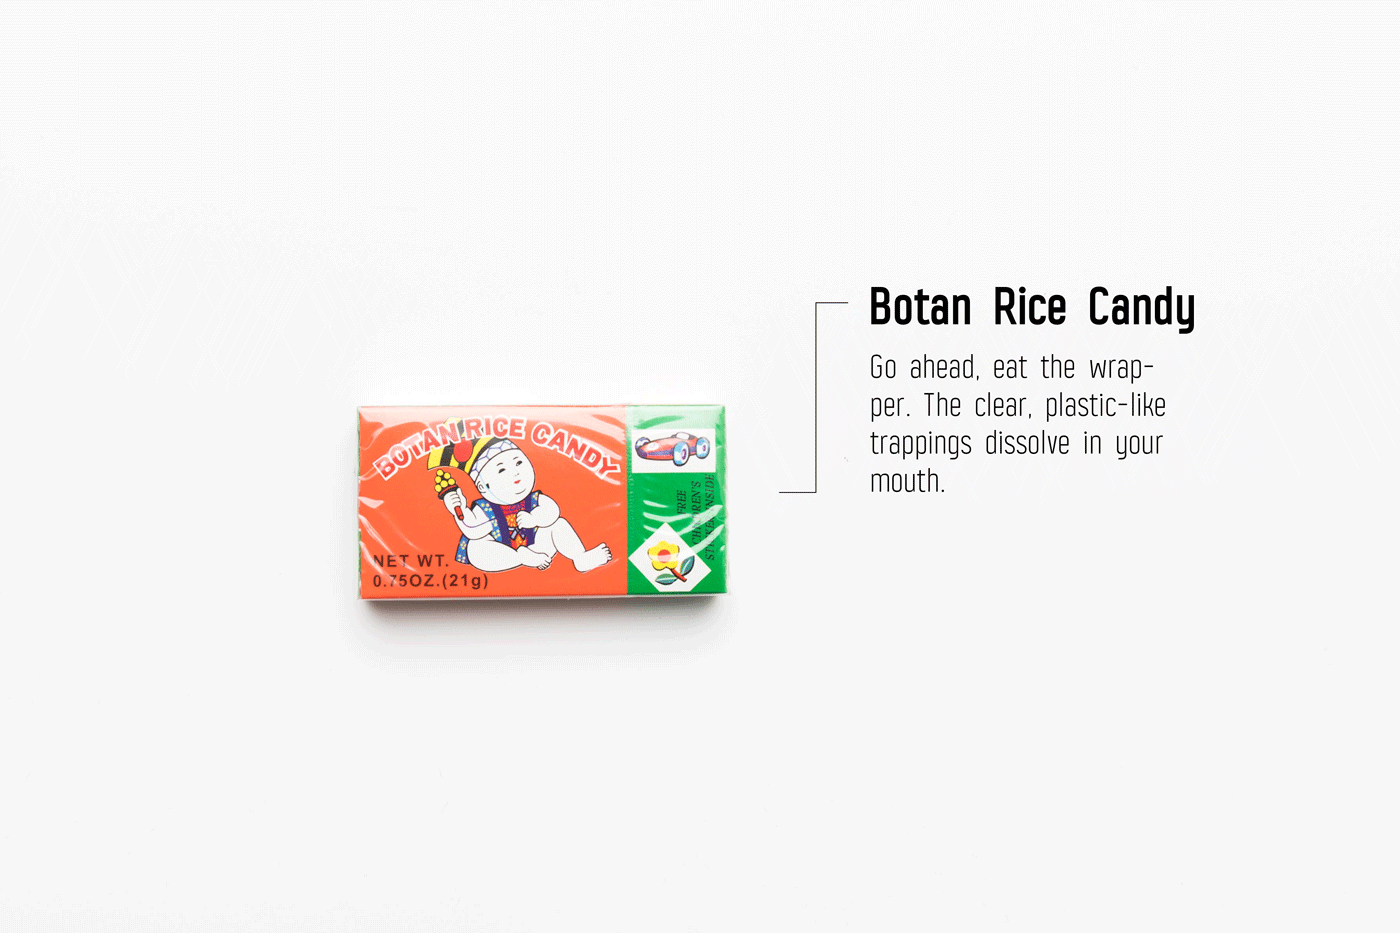 A box of Botan Rice Candy photographed on a white background